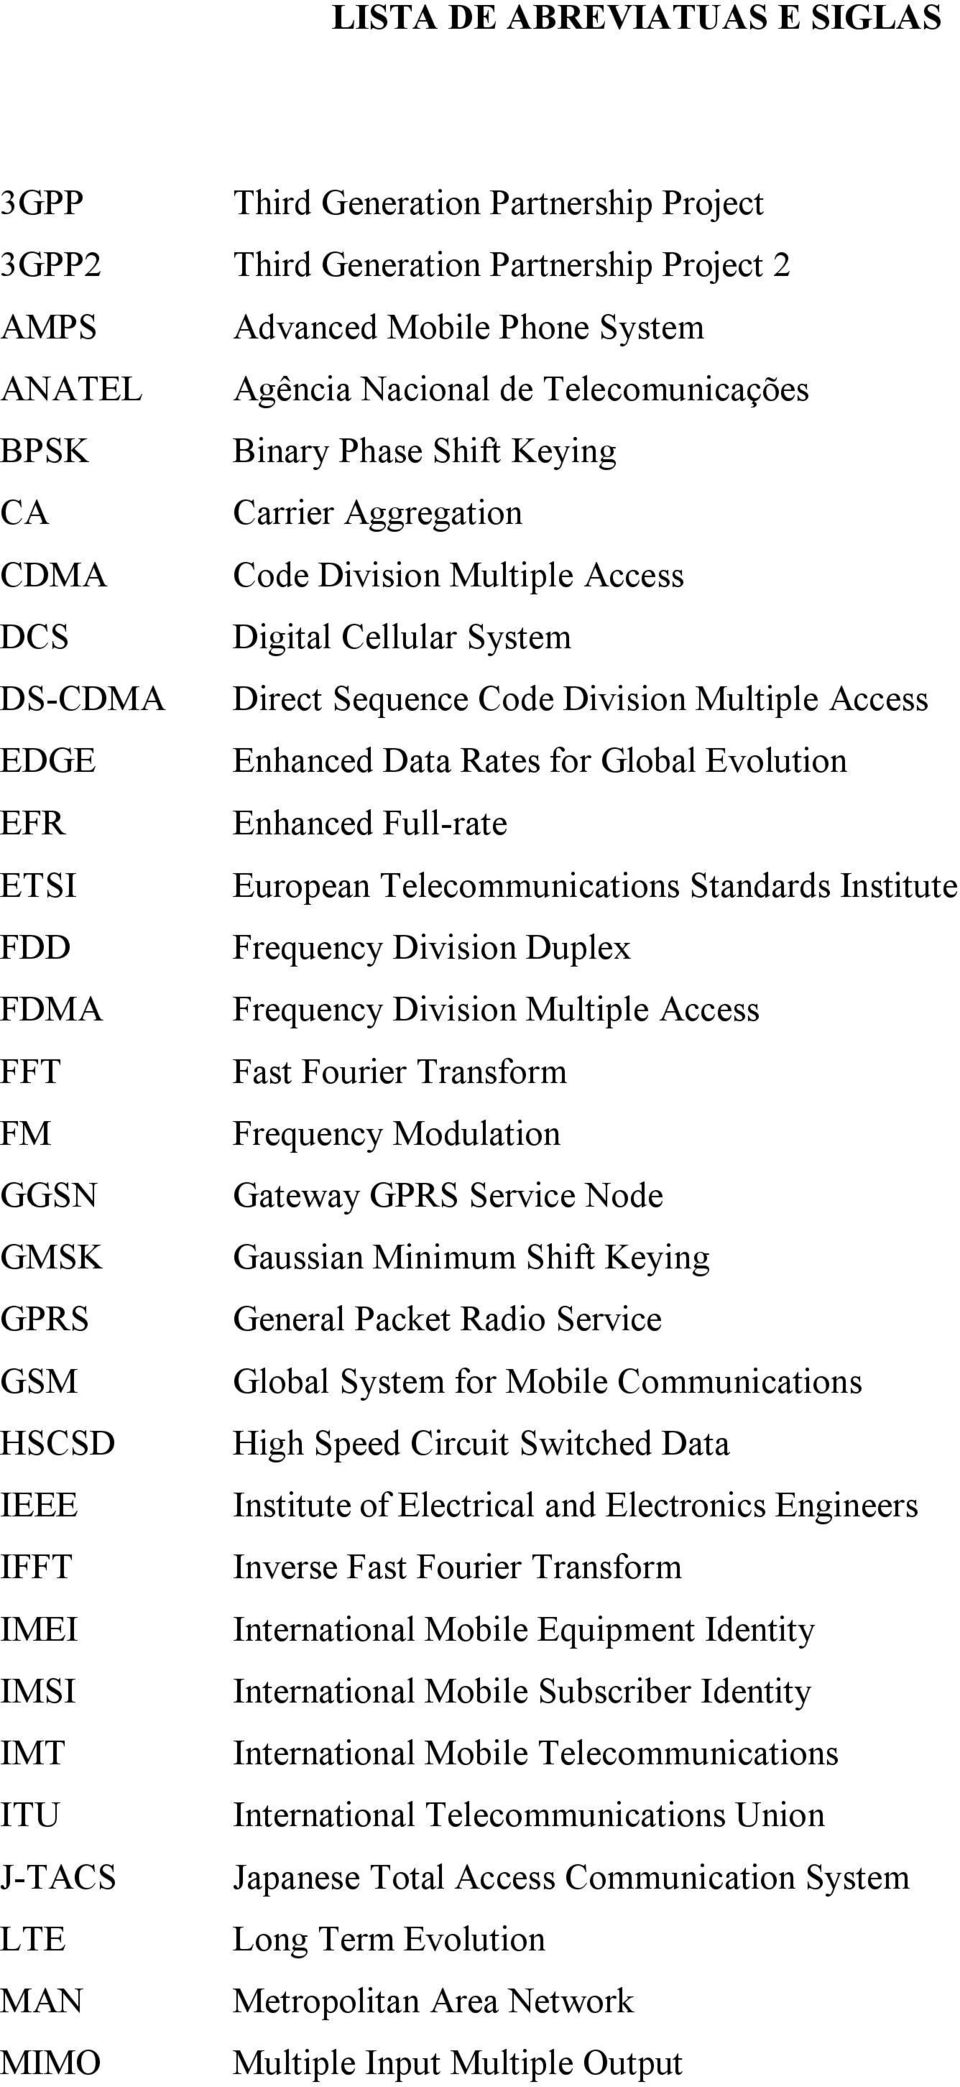 Global Evolution EFR Enhanced Full-rate ETSI European Telecommunications Standards Institute FDD Frequency Division Duplex FDMA Frequency Division Multiple Access FFT Fast Fourier Transform FM